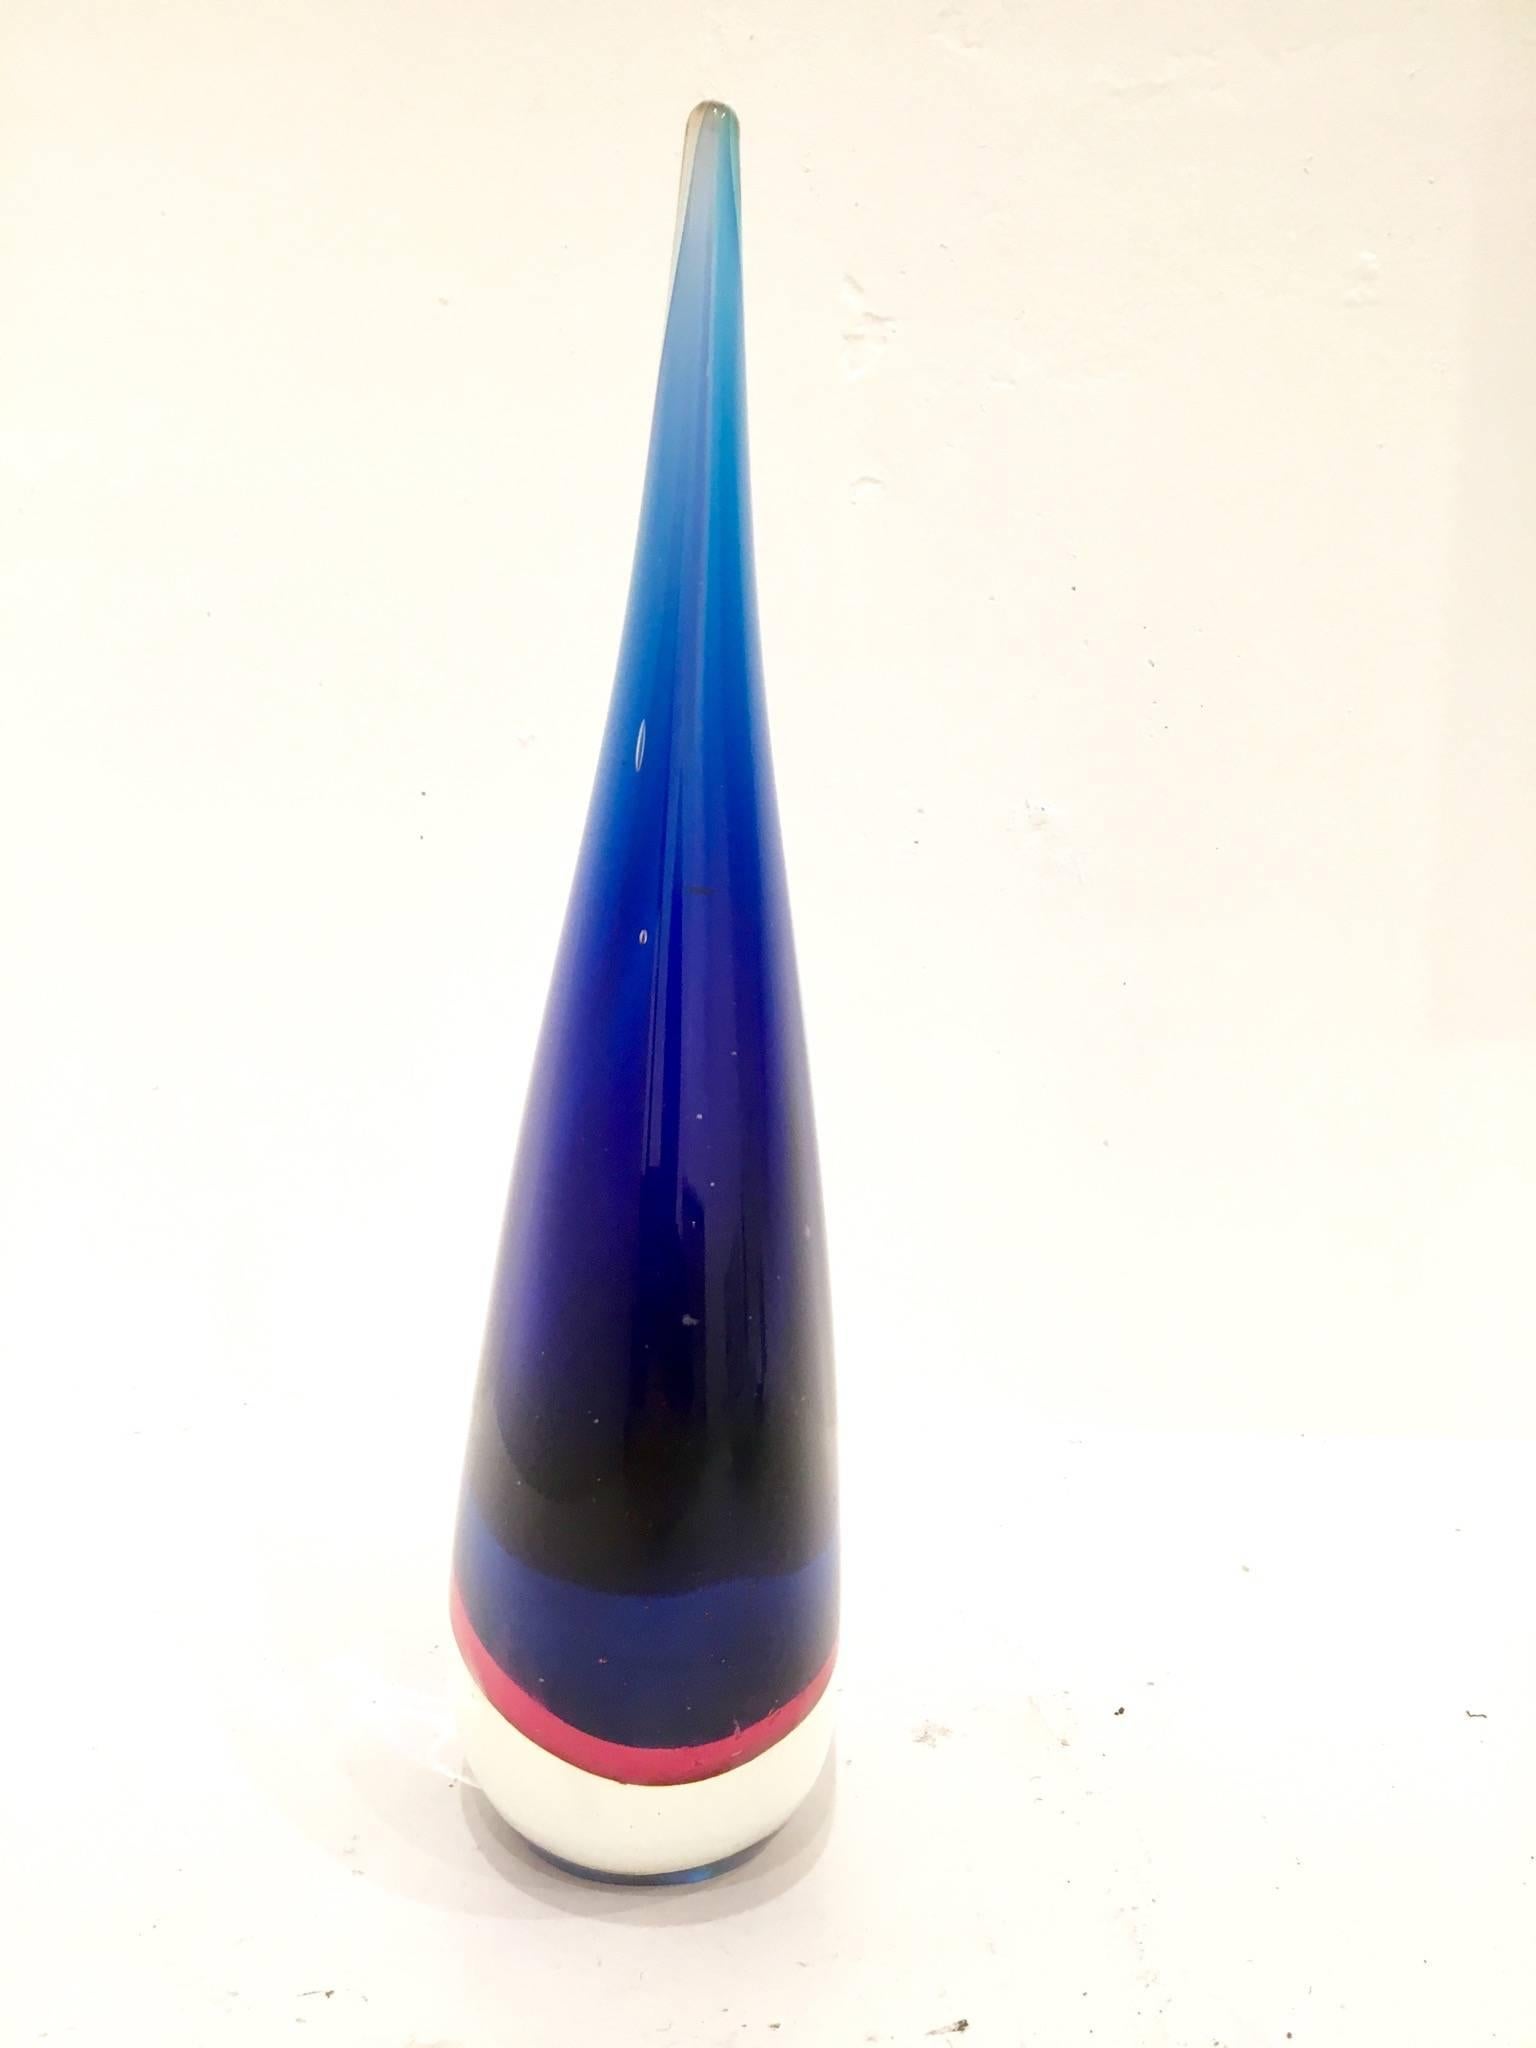 Beautiful teardrop glass sculpture by Flavio Poli, beautiful colors and shape no chips or cracks navy blue light blue, pink and clear.